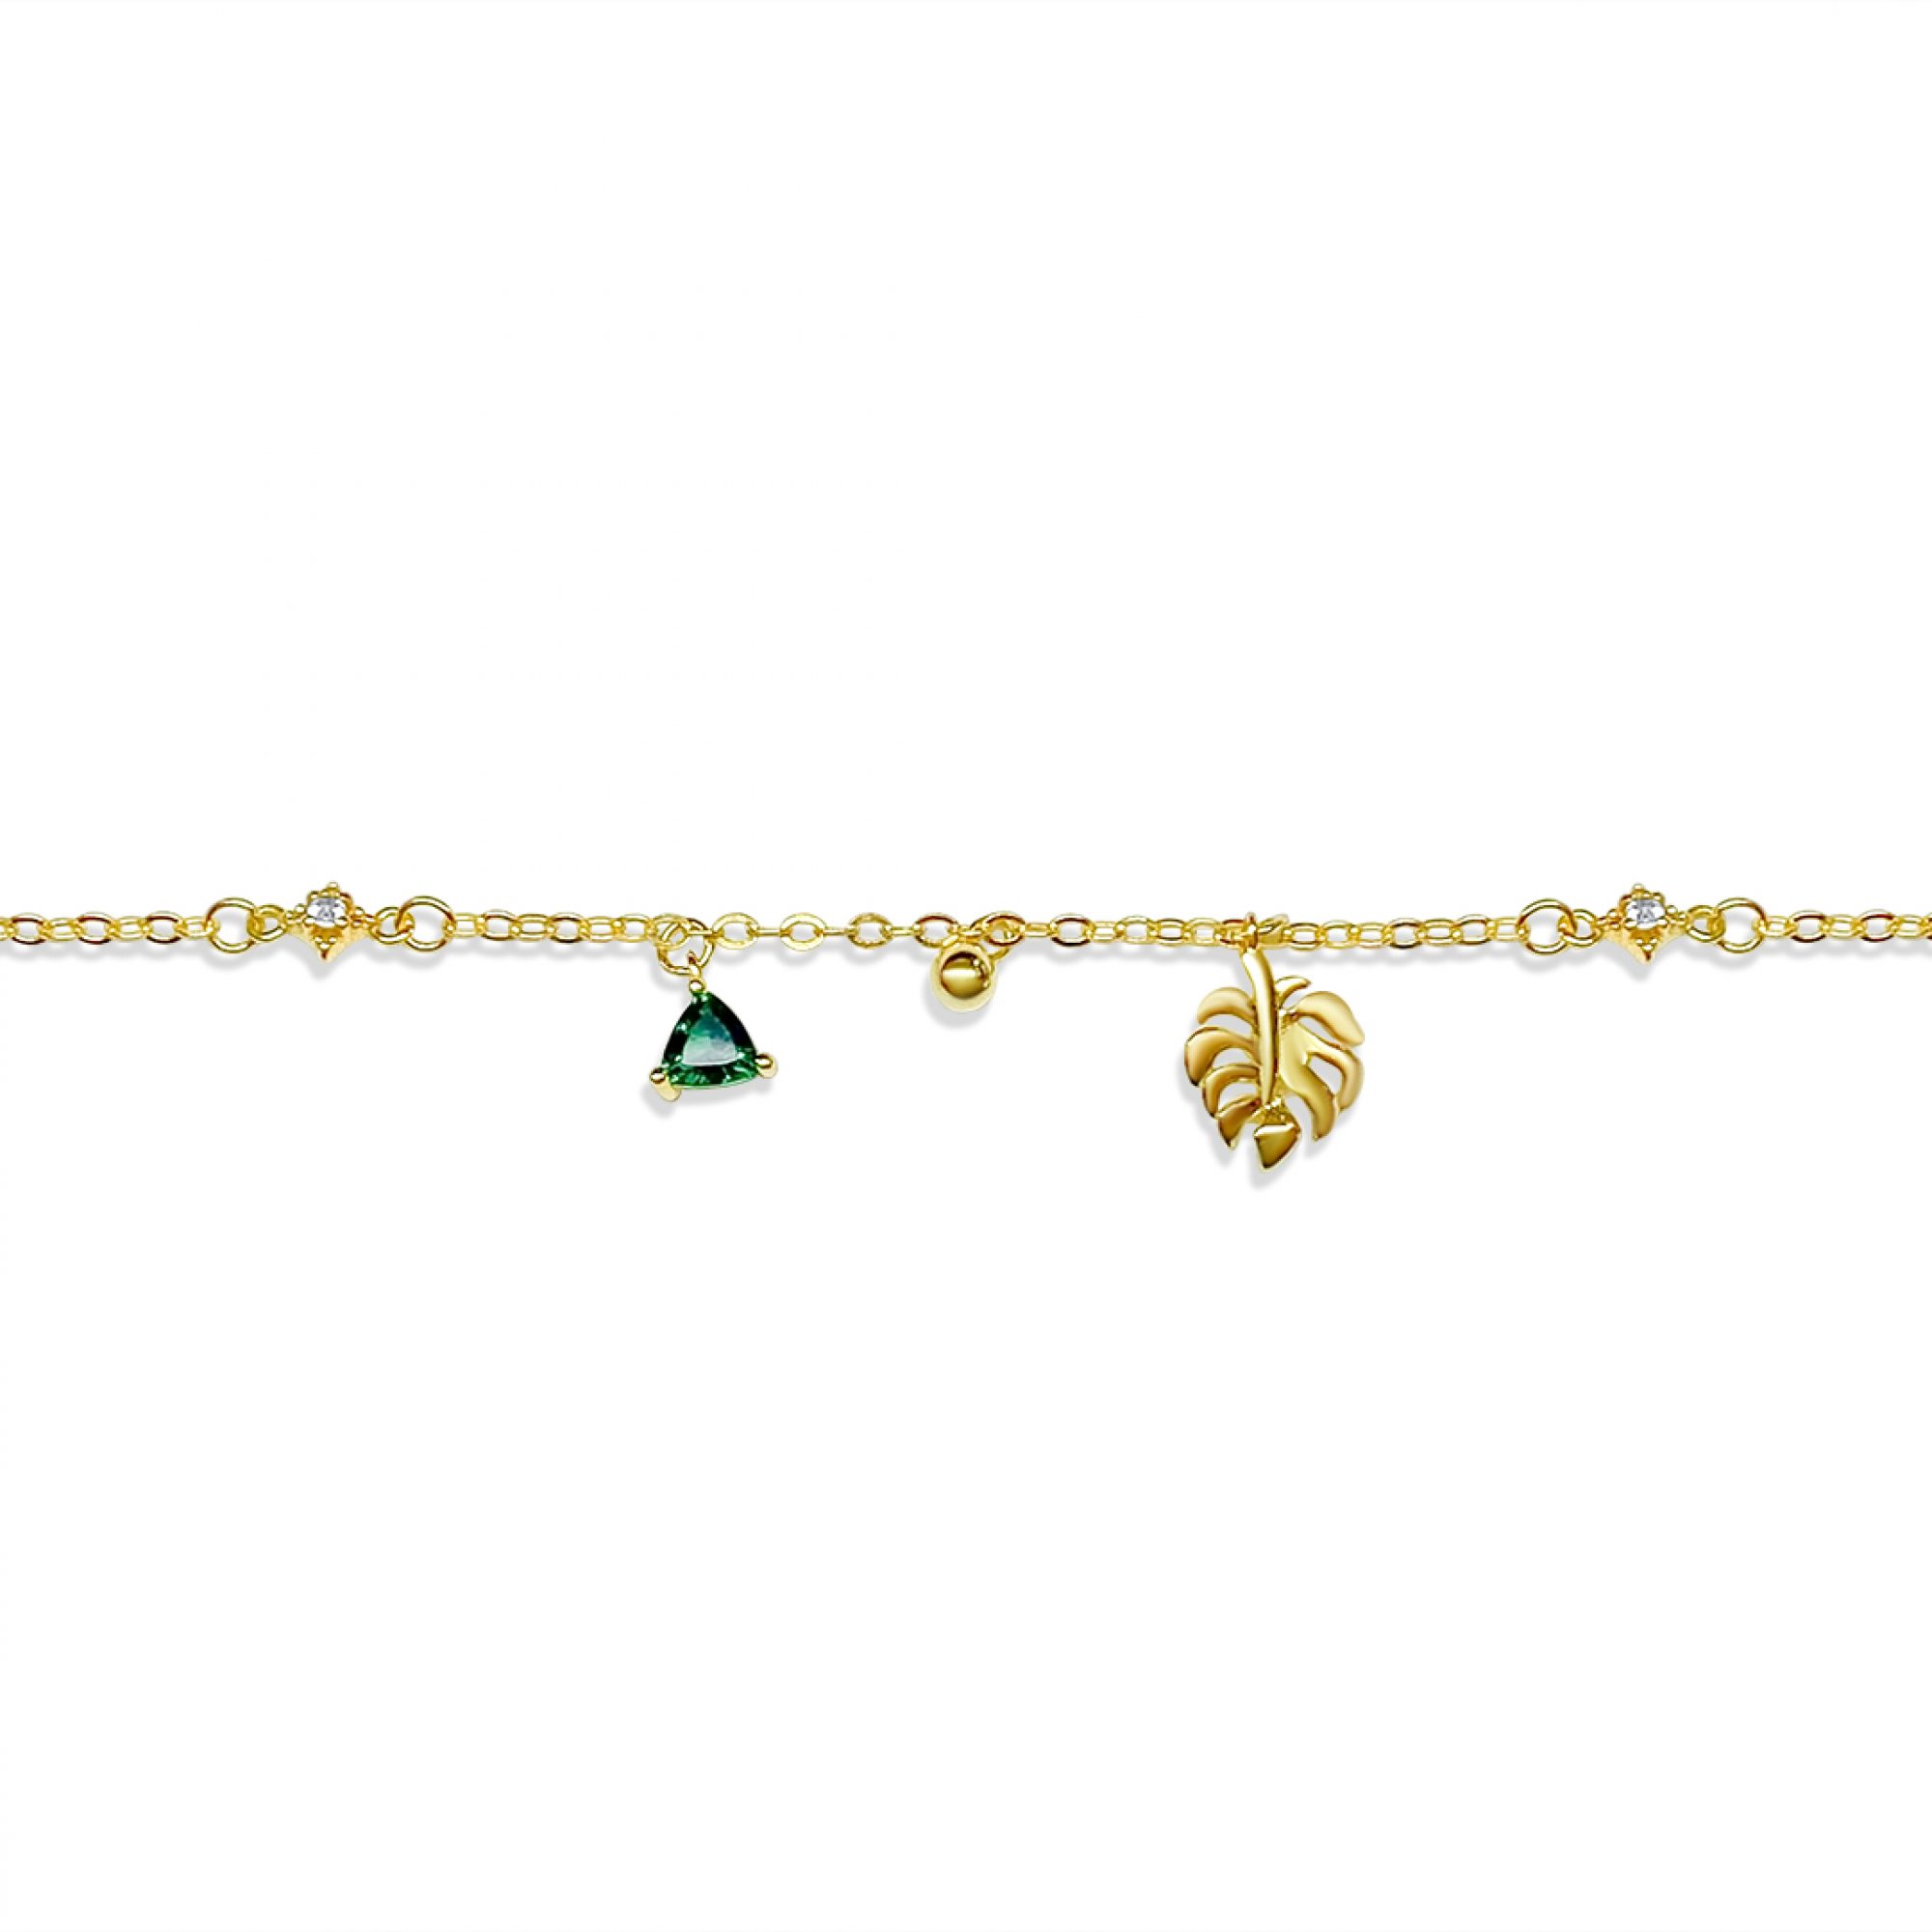 Gold plated bracelet with zircon and emerald stones